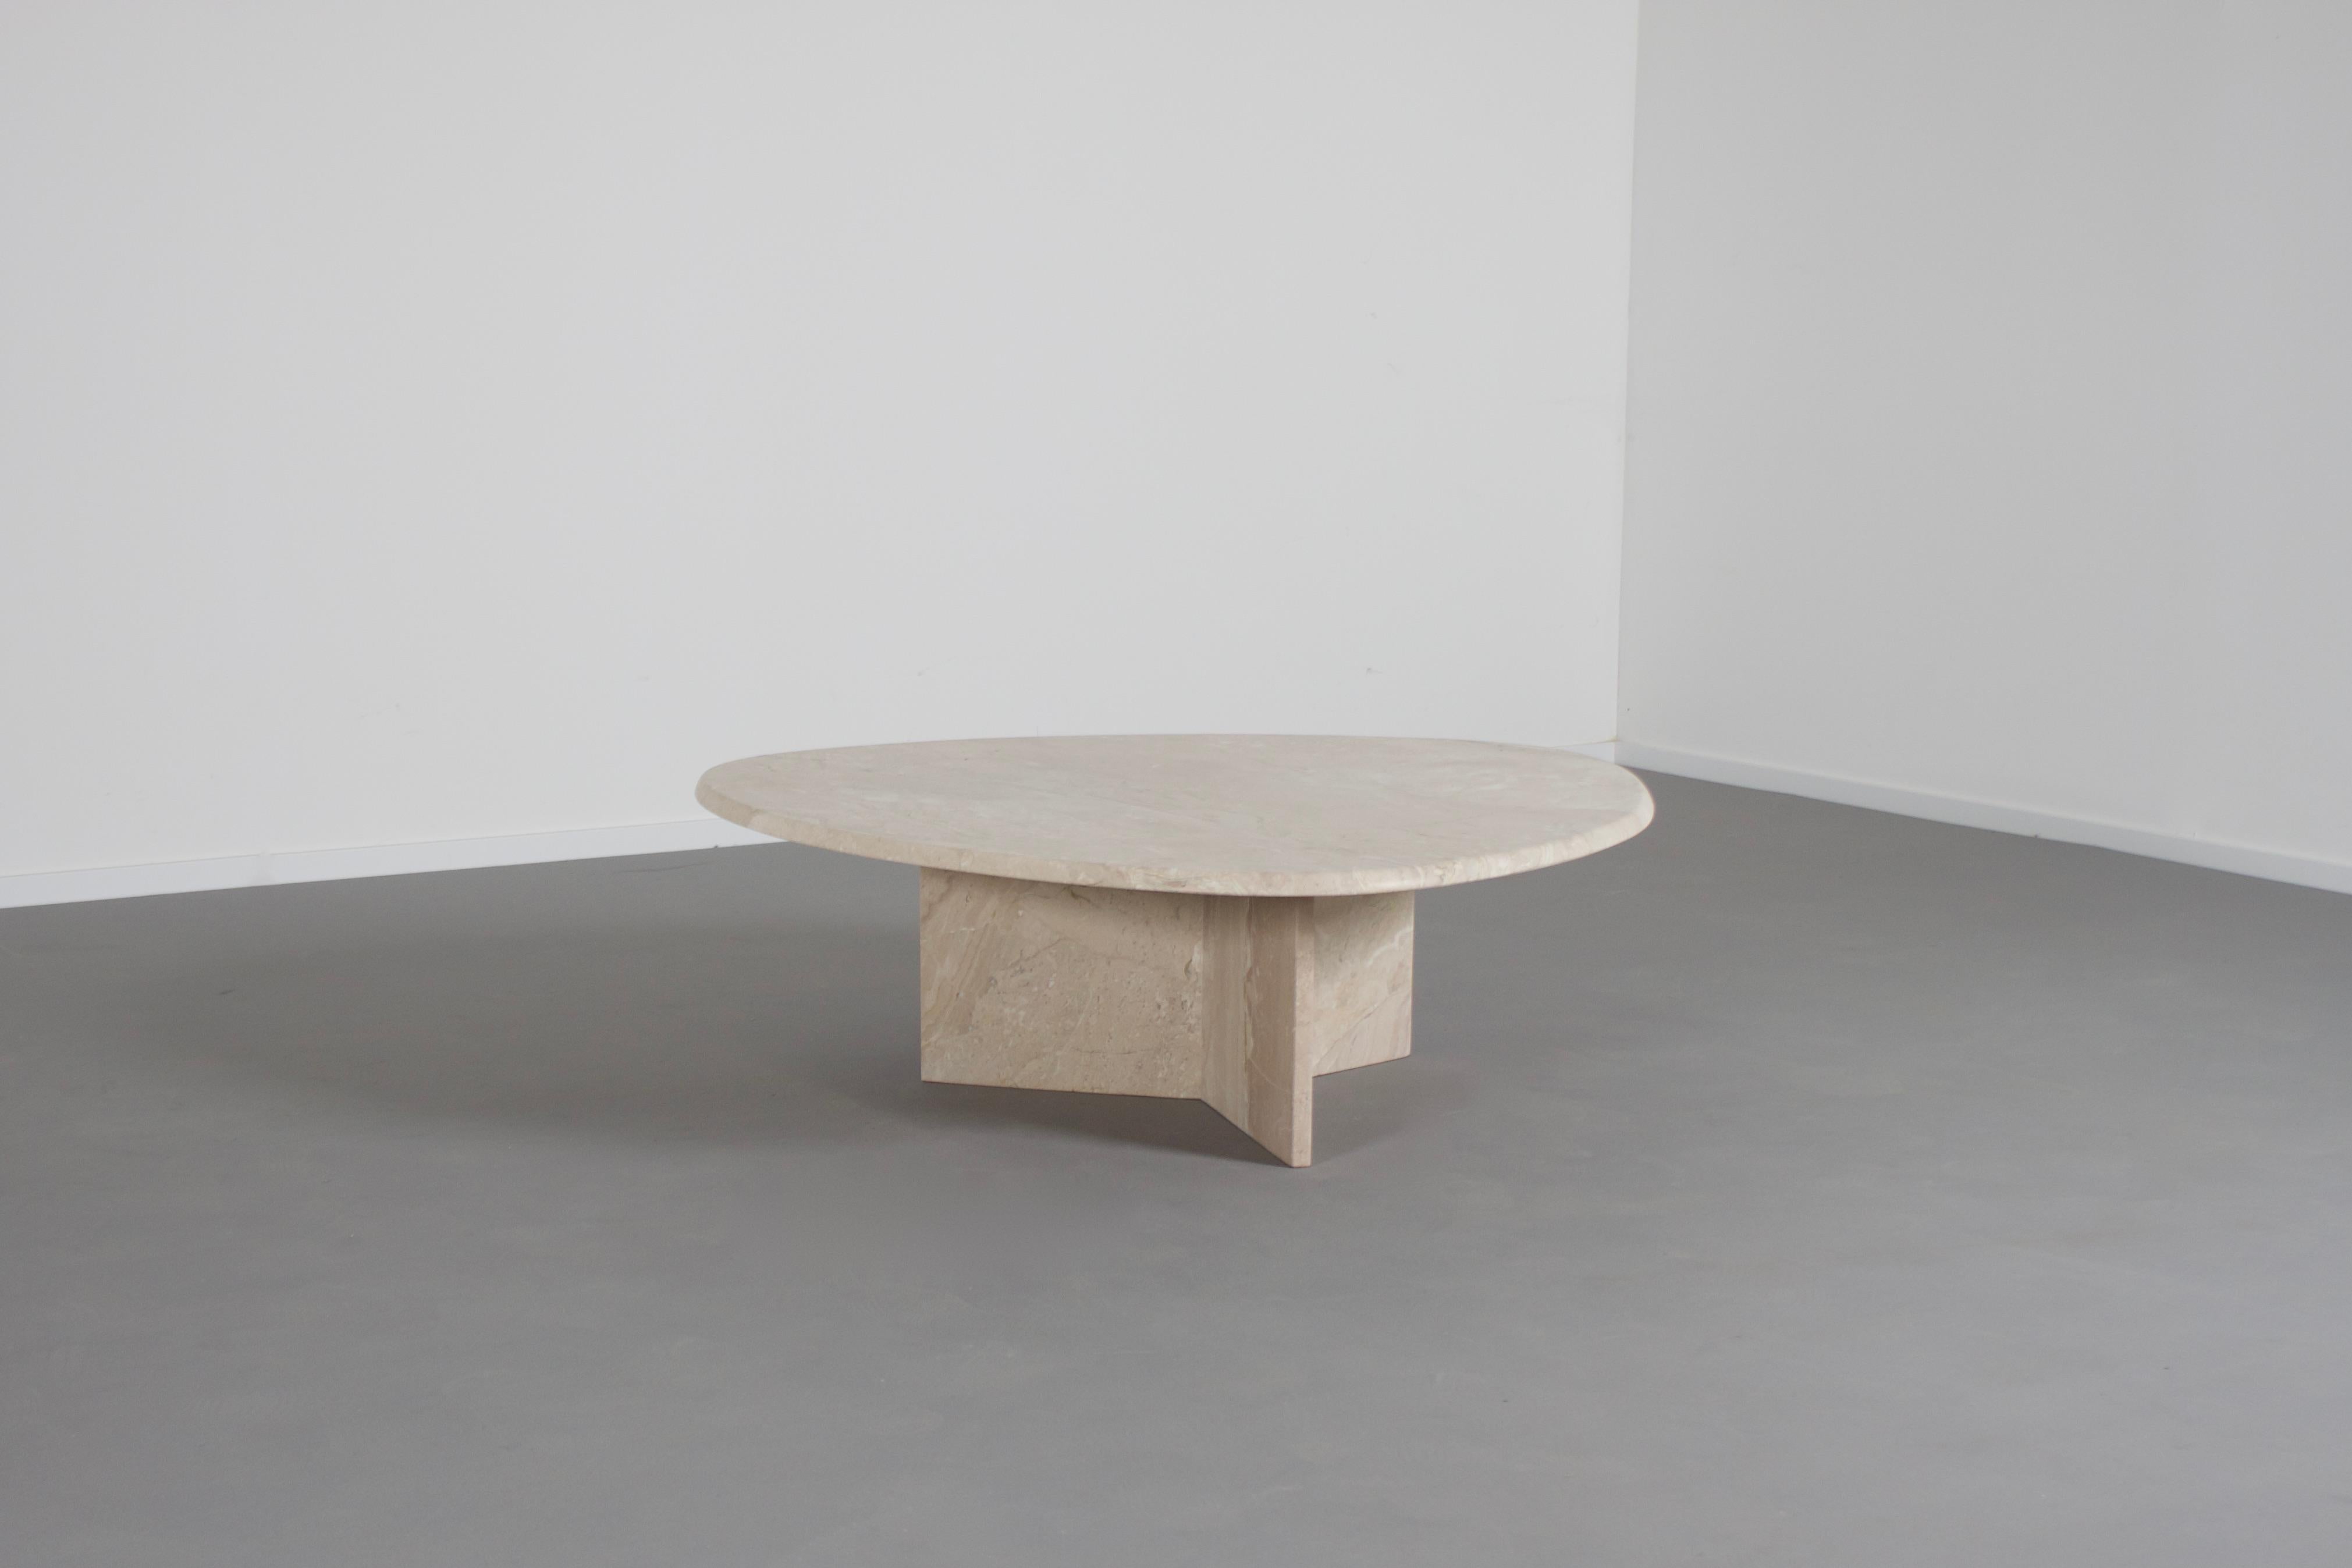 Beautiful coffee table in excellent condition.

The table has a organic triangular shaped top made of natural travertine.

The base is formed of three slabs of travertine which combine into a star shape.

The travertine surface is absolutely